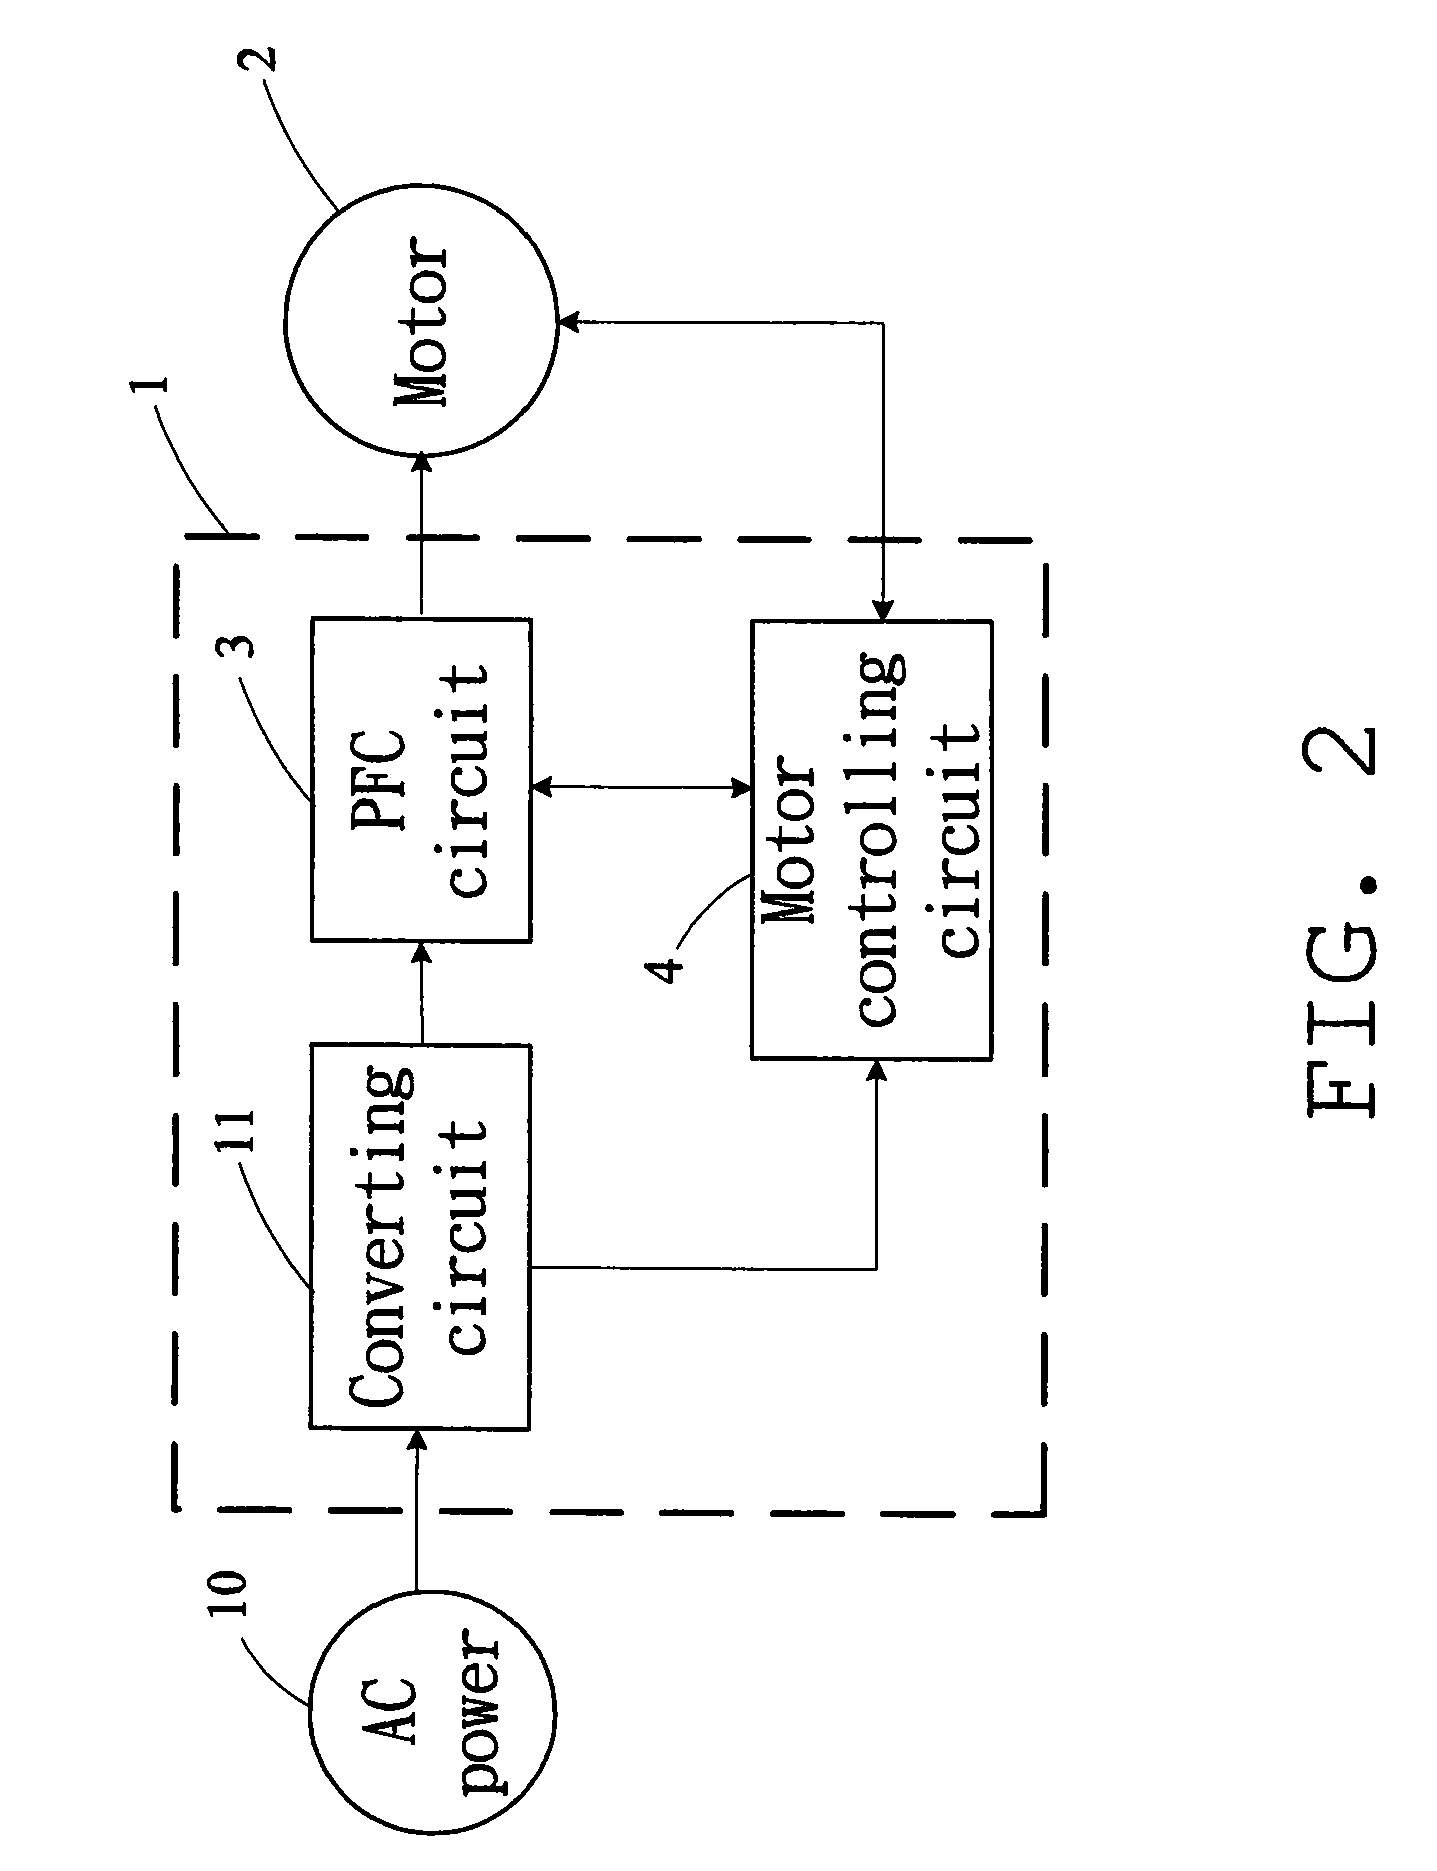 Fan and motor control device